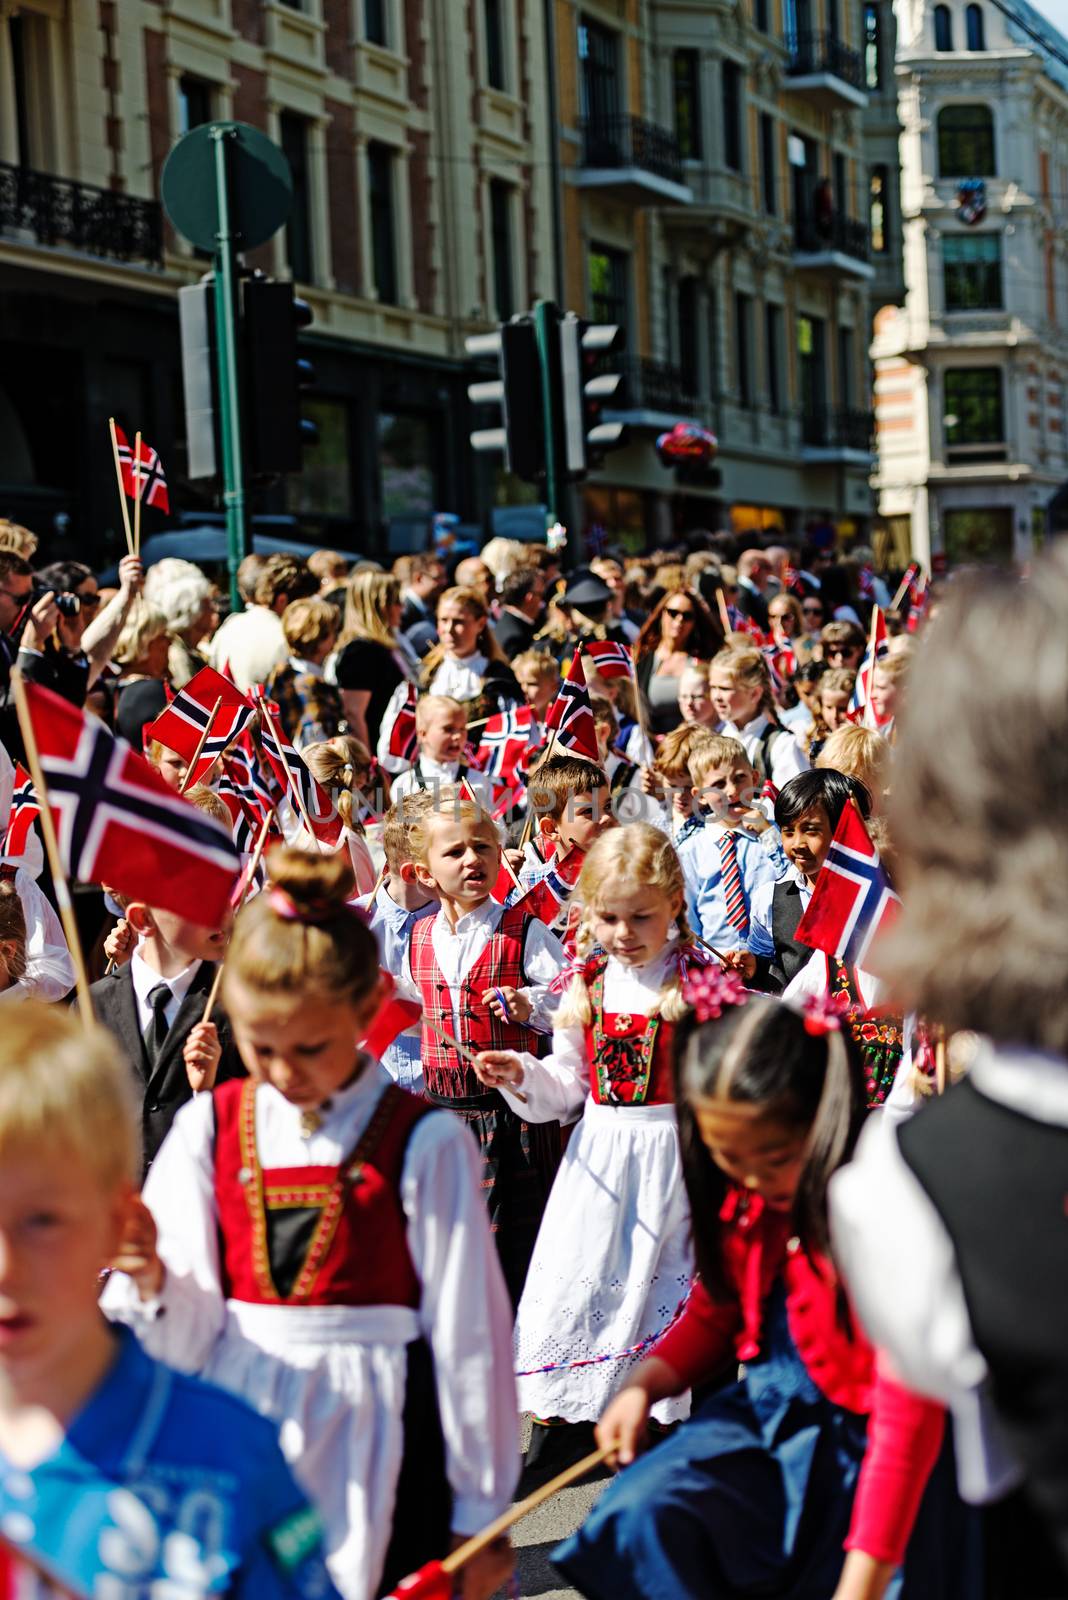 OSLO - MAY 17: Norwegian Constitution Day is the National Day of Norway and is an official national holiday observed on May 17 each year. Pictured on May 17, 2014